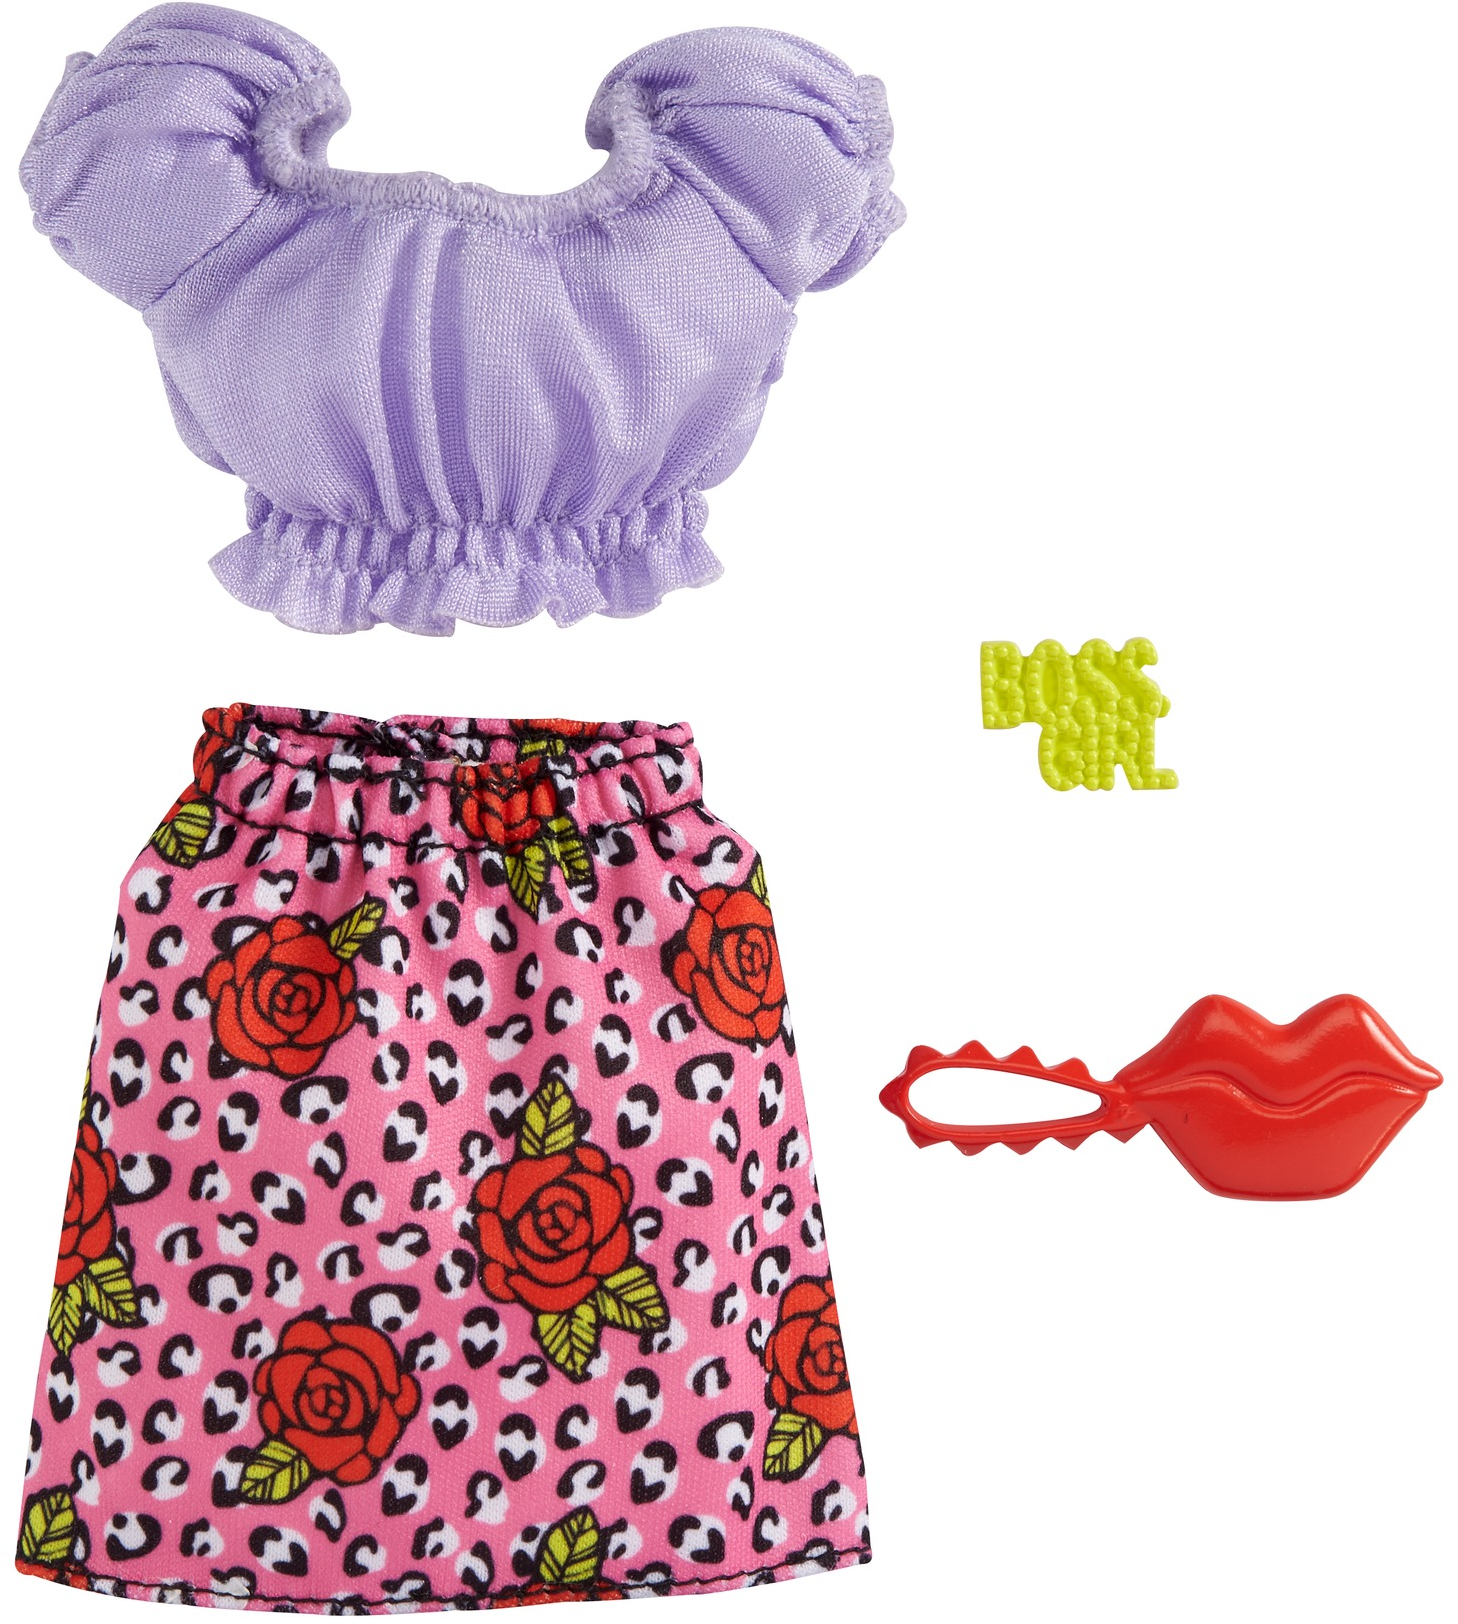 GRB96 - Barbie Fashion Pack with Purple Crop Top, Floral Skirt